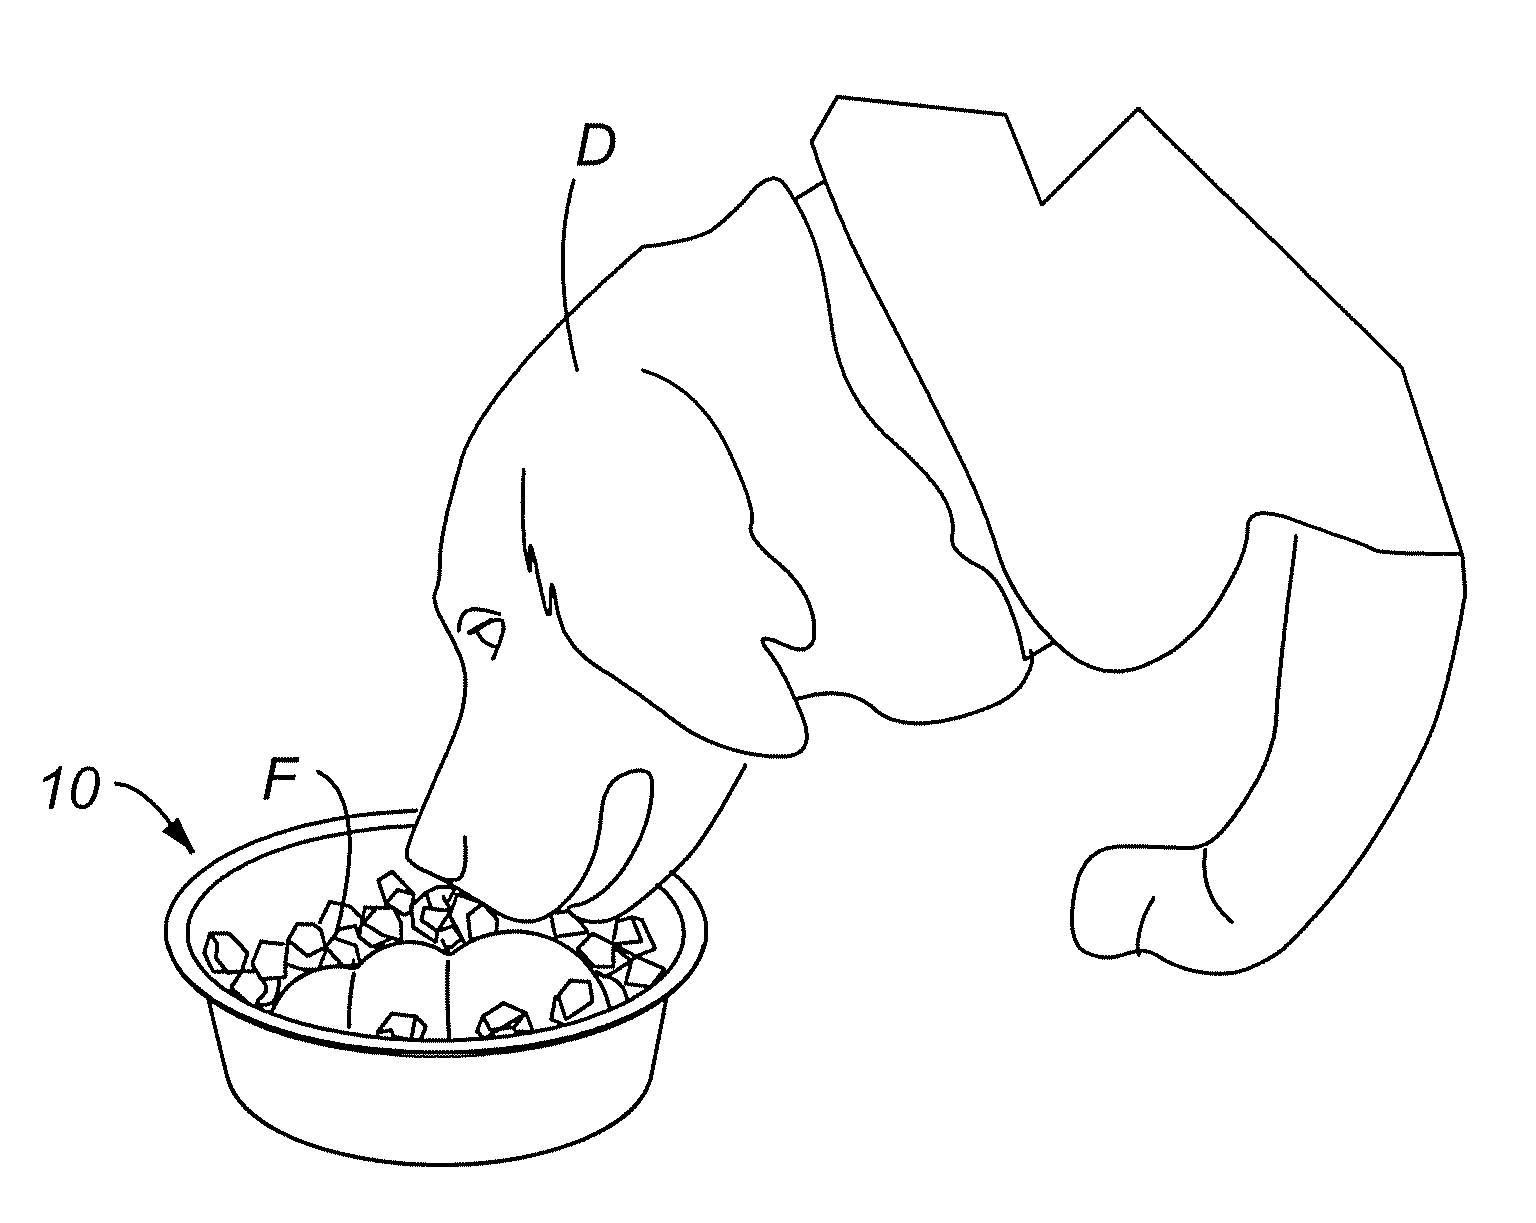 Pet Food Bowl With Integral Protrusion for Preventing Aspiration of Food